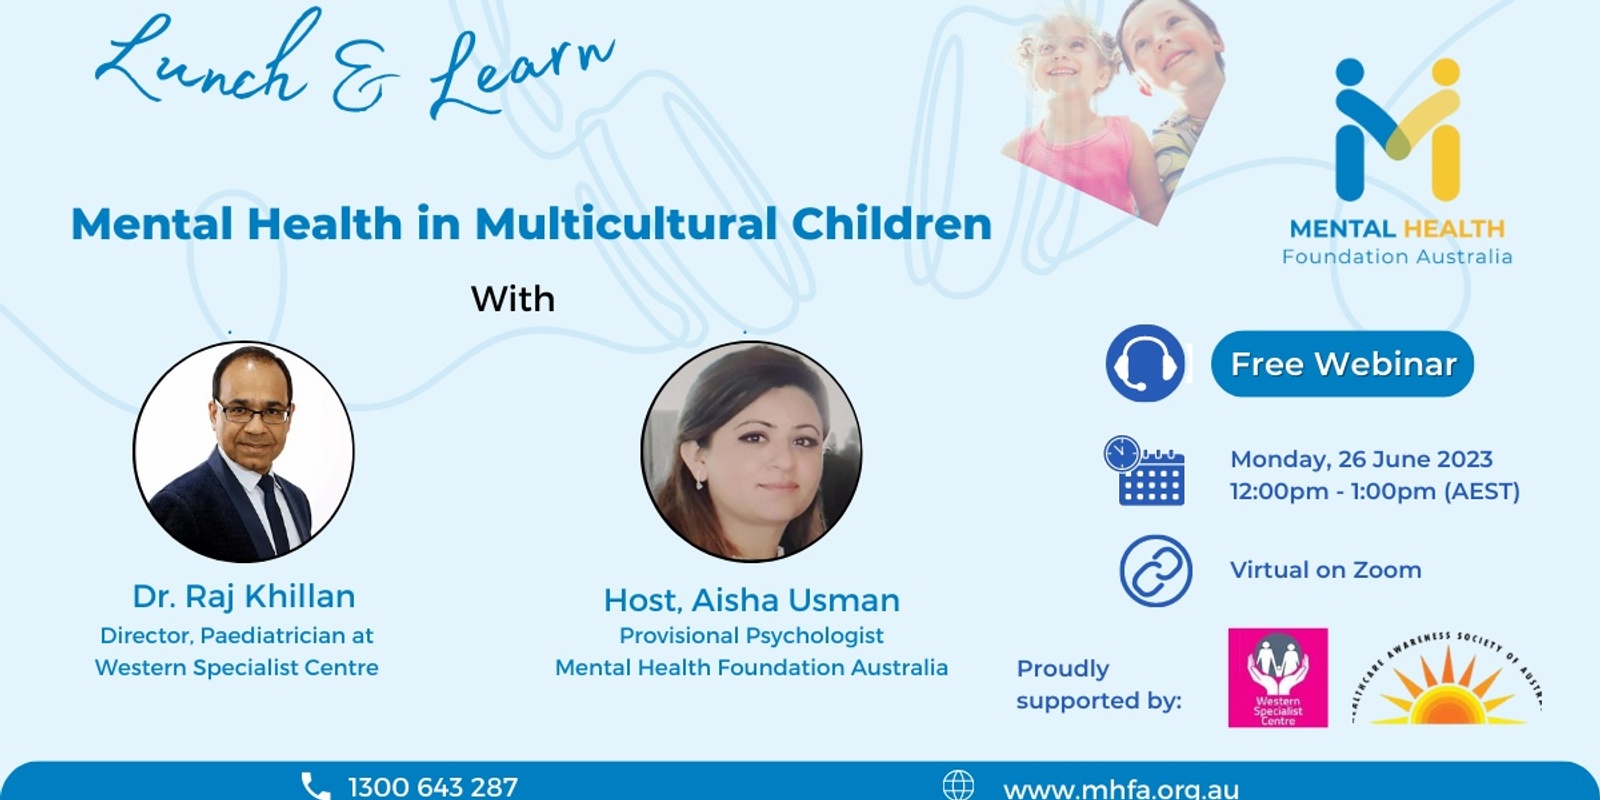 Lunch & Learn - Mental Health in Multicultural Children